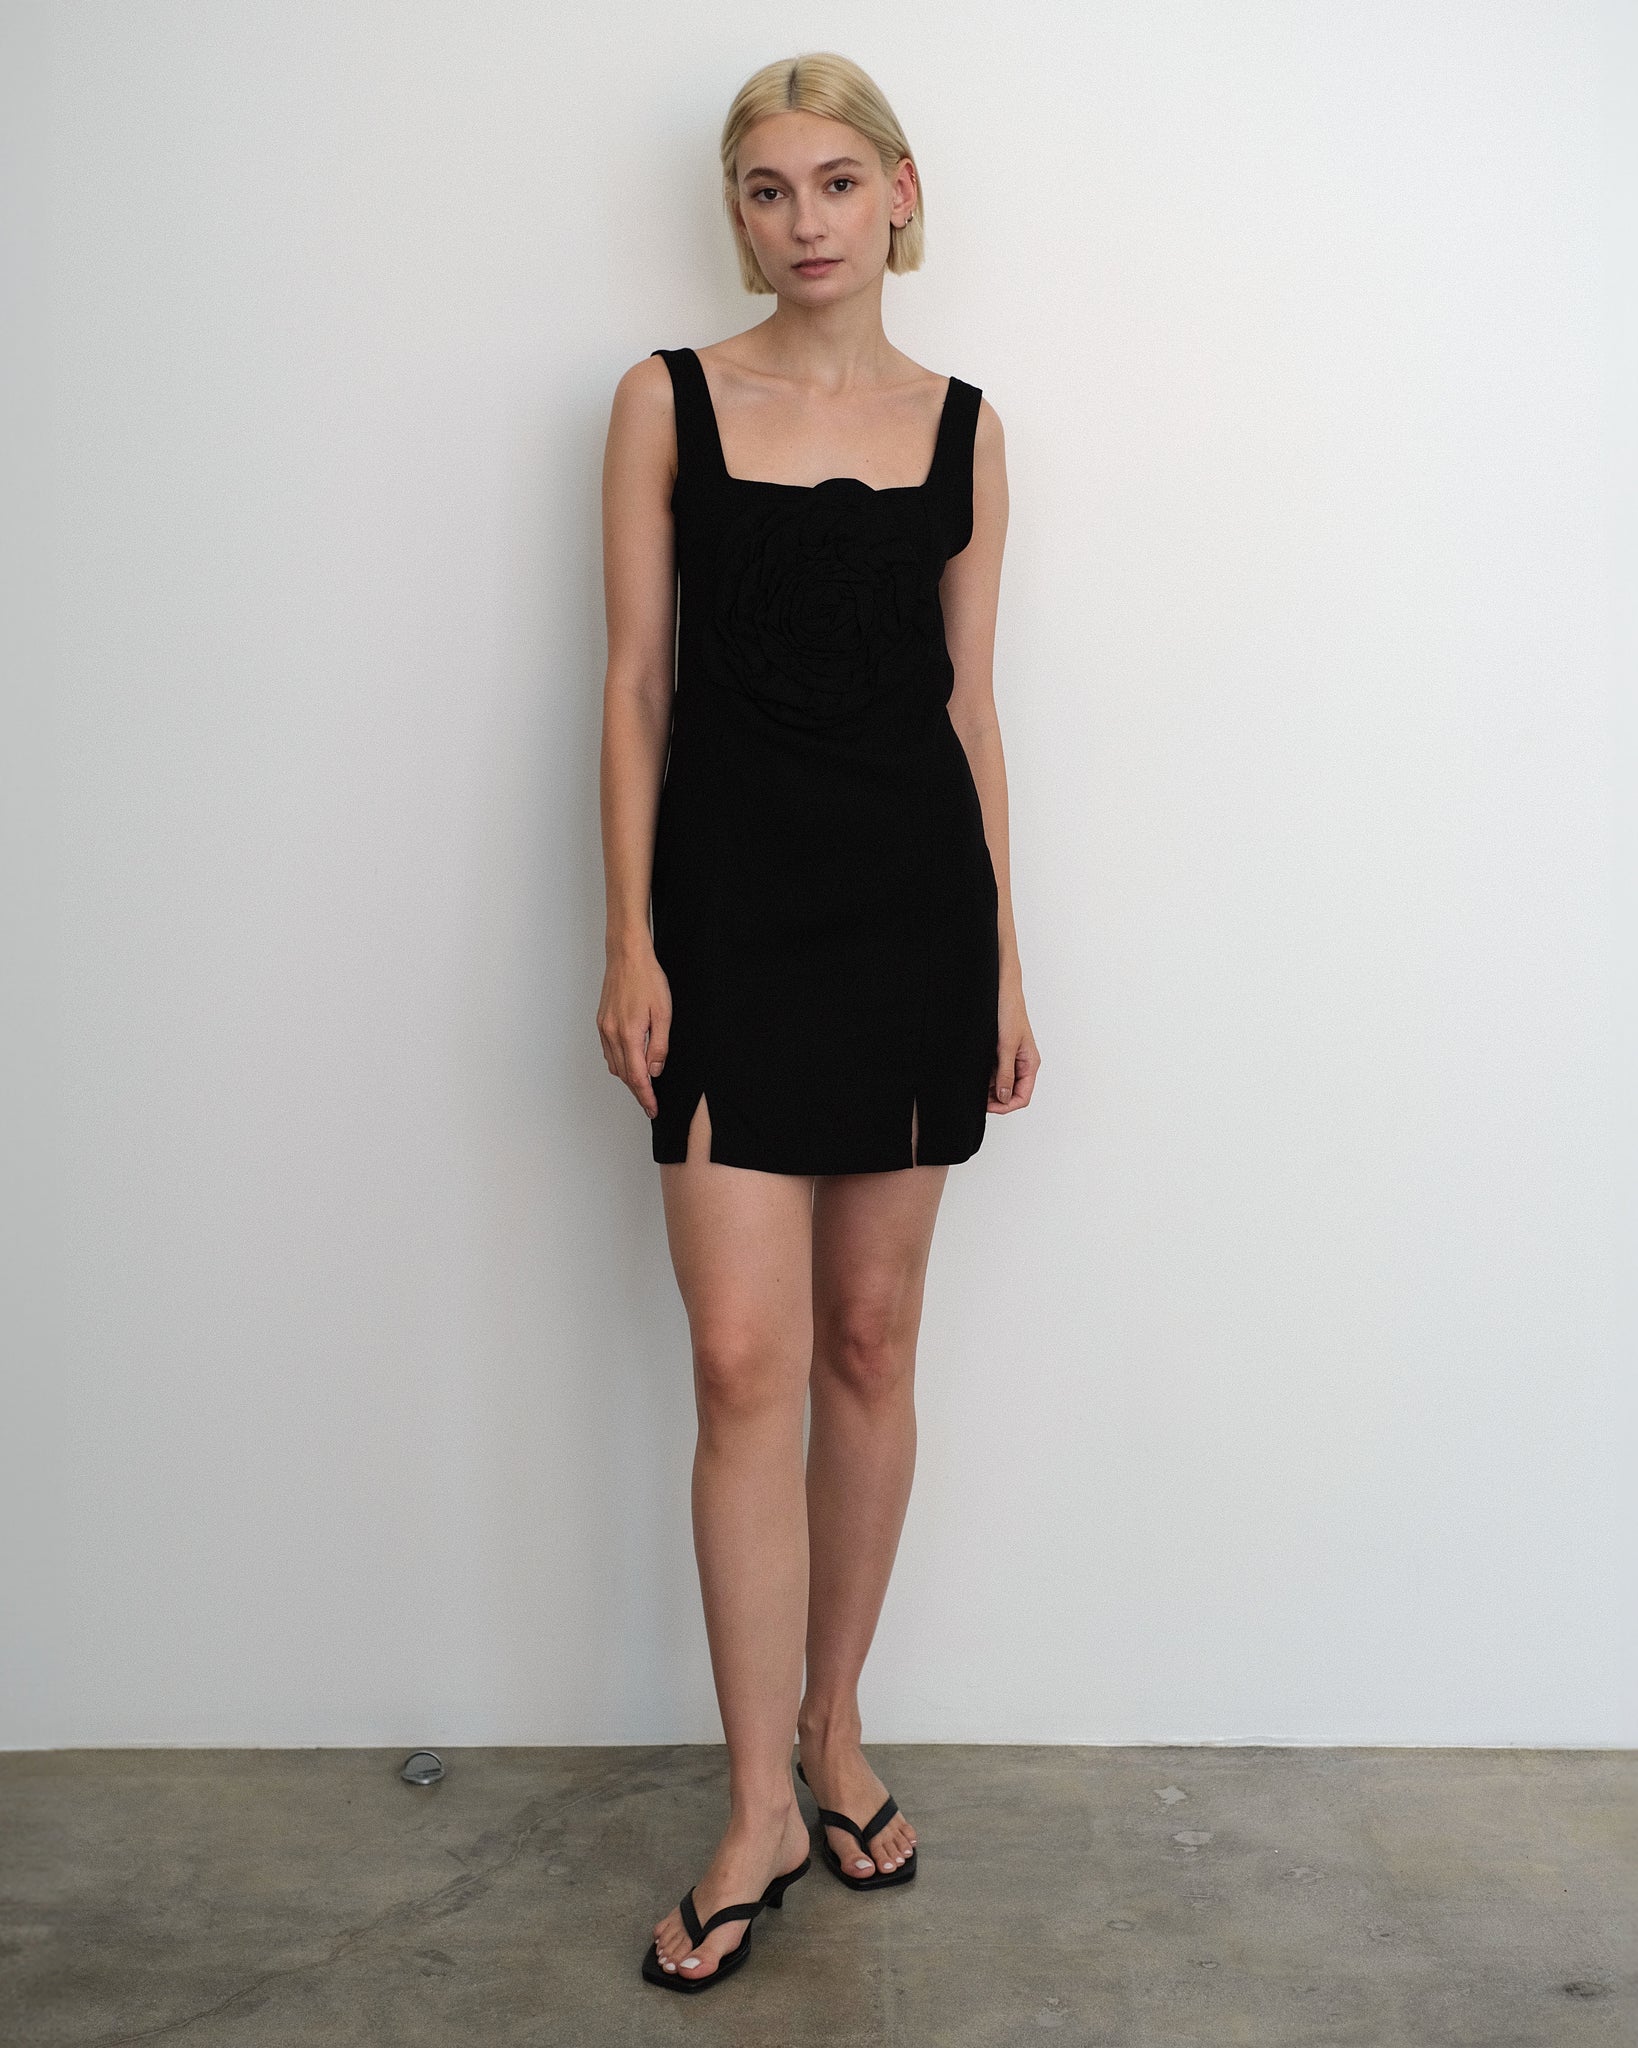 Model wearing the Marina Dress in black linen from Tach